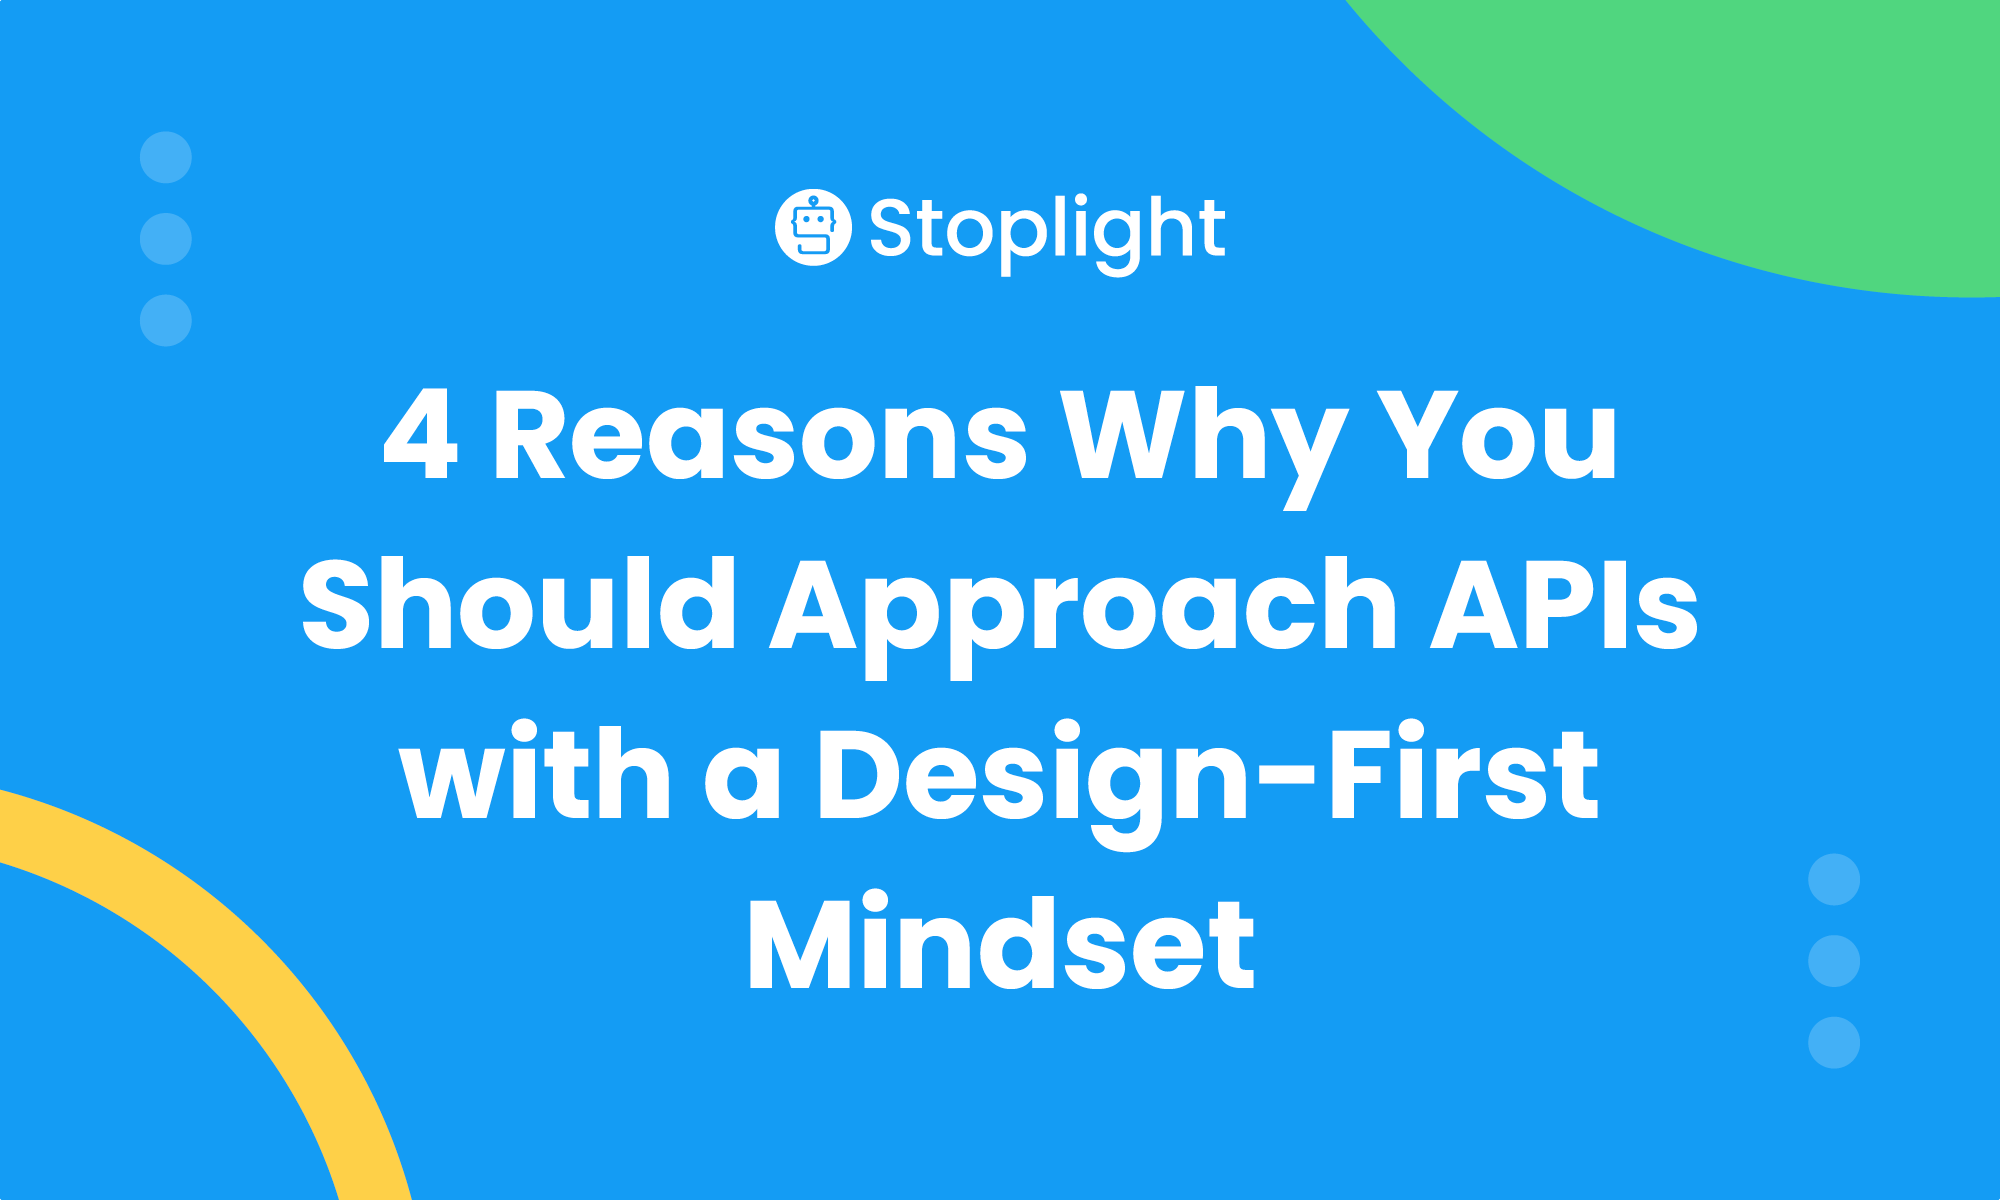 4 Reasons Why You Should Approach APIs with a Design-First Mindset